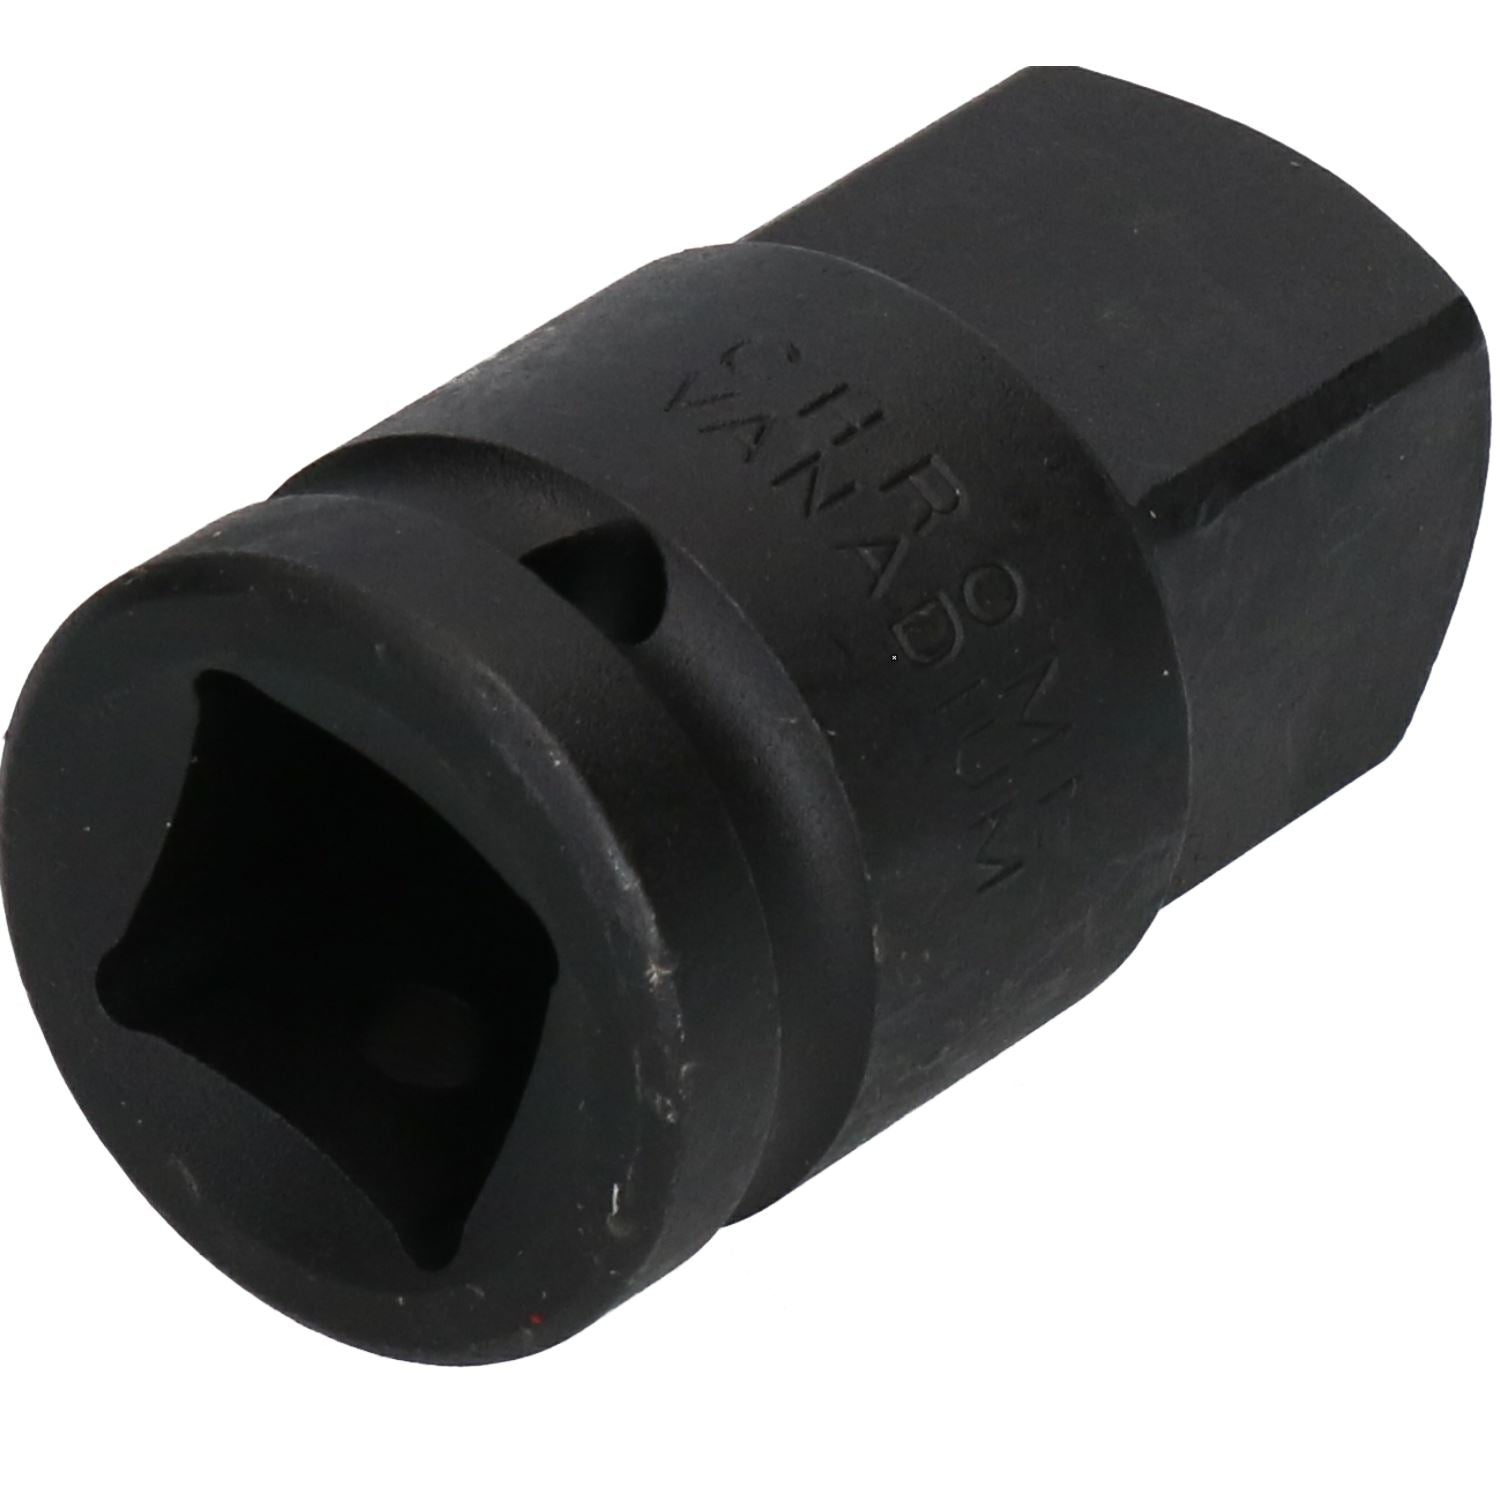 29mm Metric 3/4" or 1" Drive Deep Impact Socket 6 Sided With Step Up Adapter